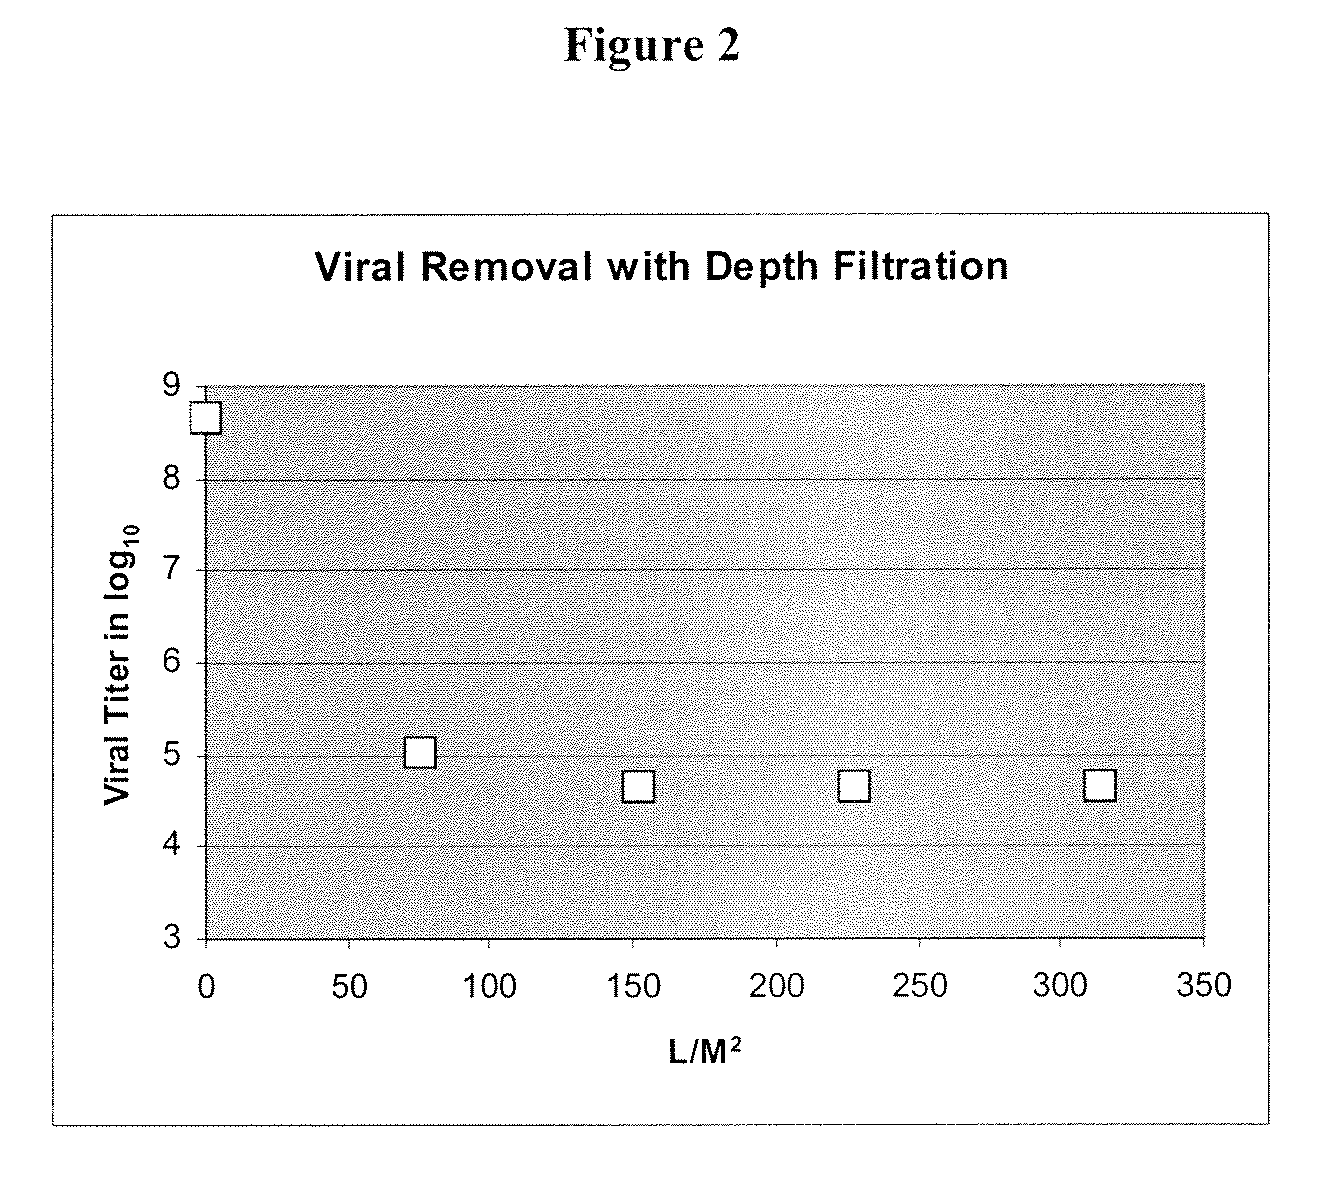 Methods for Removing Viral Contaminants During Protein Purification